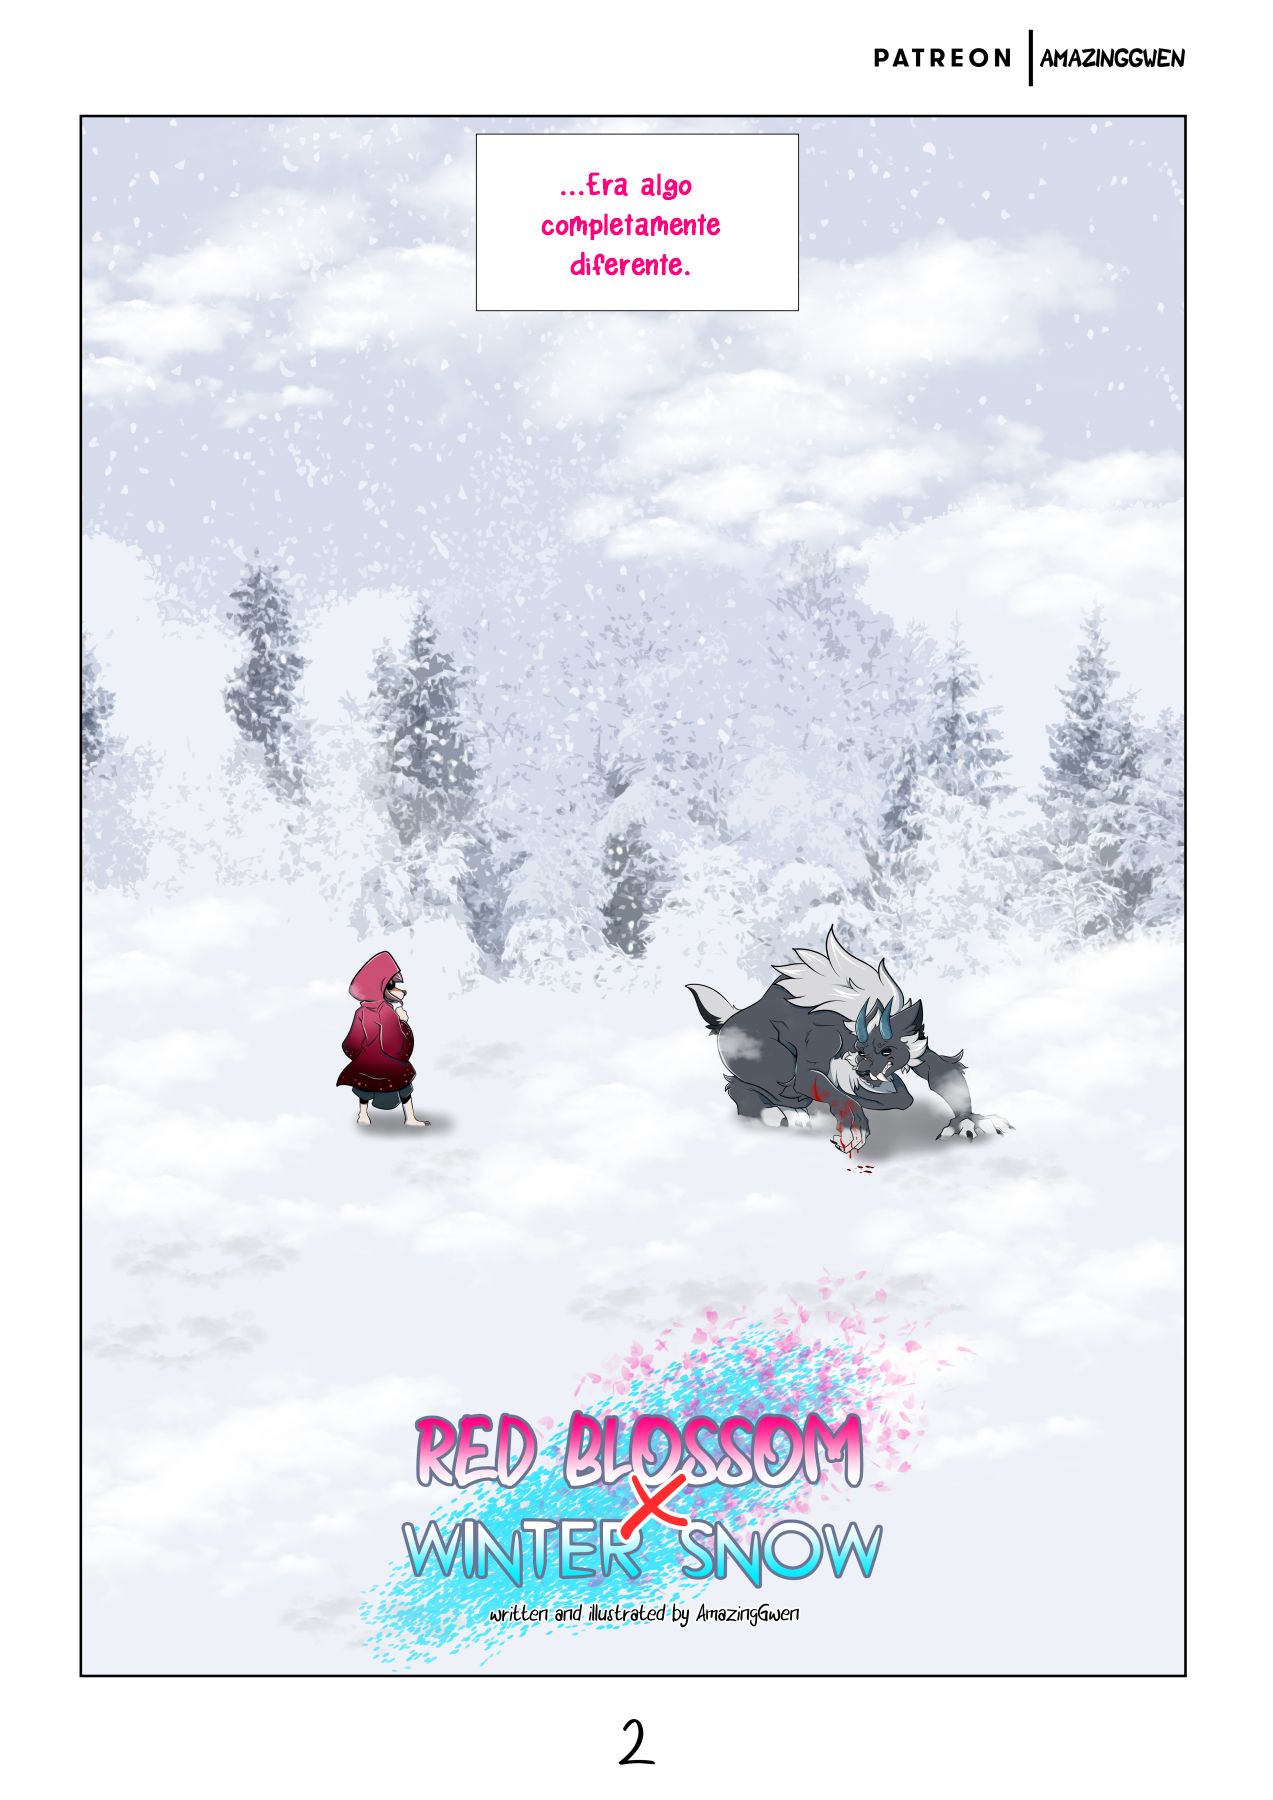 RED BLOSSOM and Winter Snow